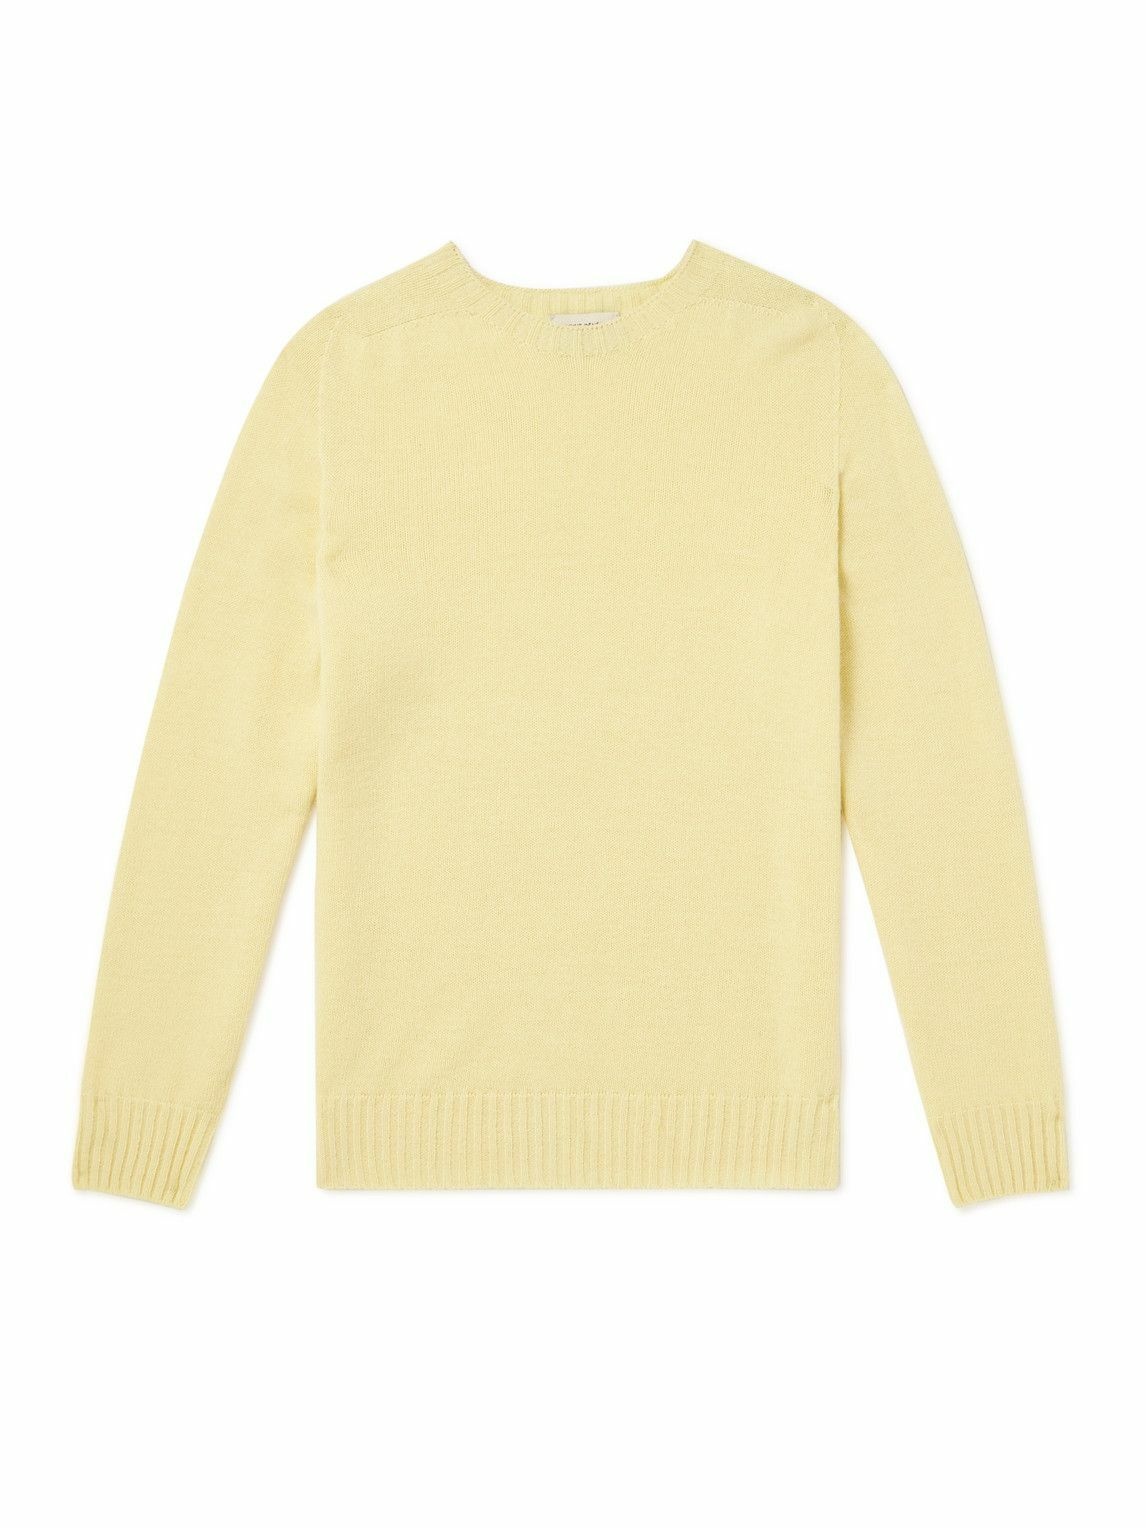 Officine Générale - Merino Wool and Cashmere-Blend Sweater - Yellow ...